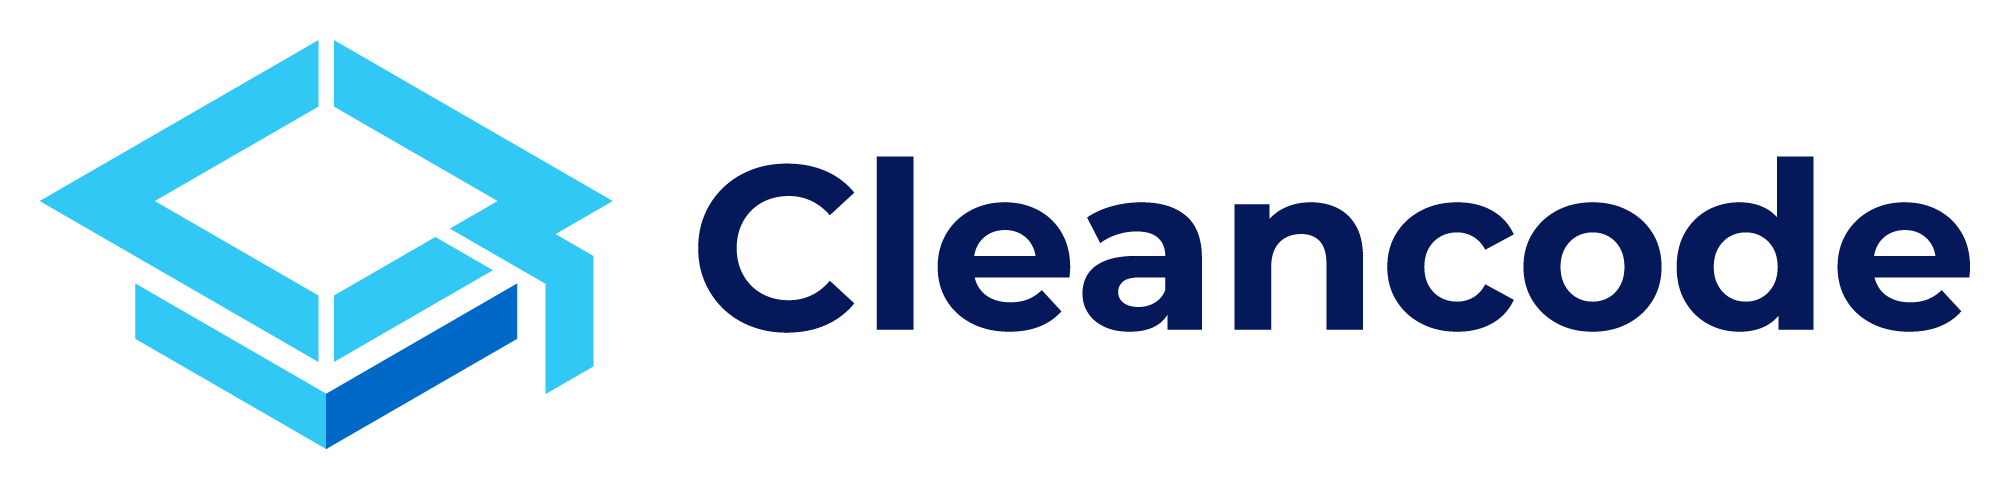 Shop – Cleancode merchandise and stationery in one place.